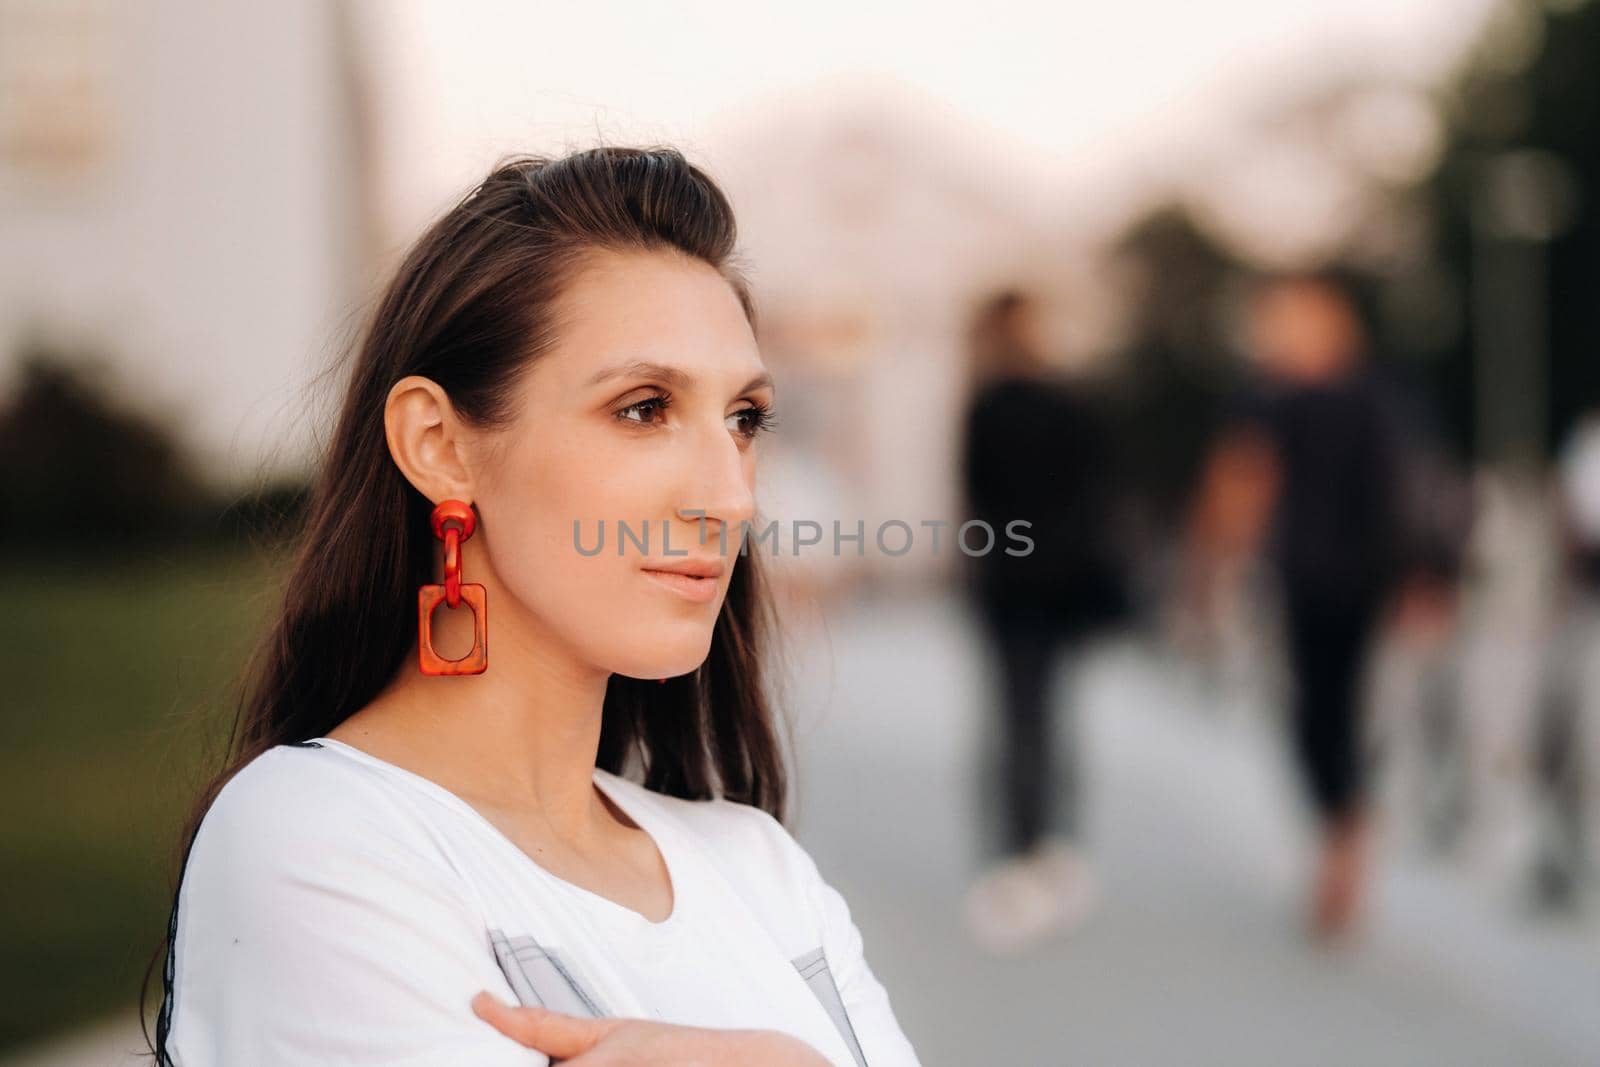 Close-up portrait of a girl with red earrings in white clothes in the city.